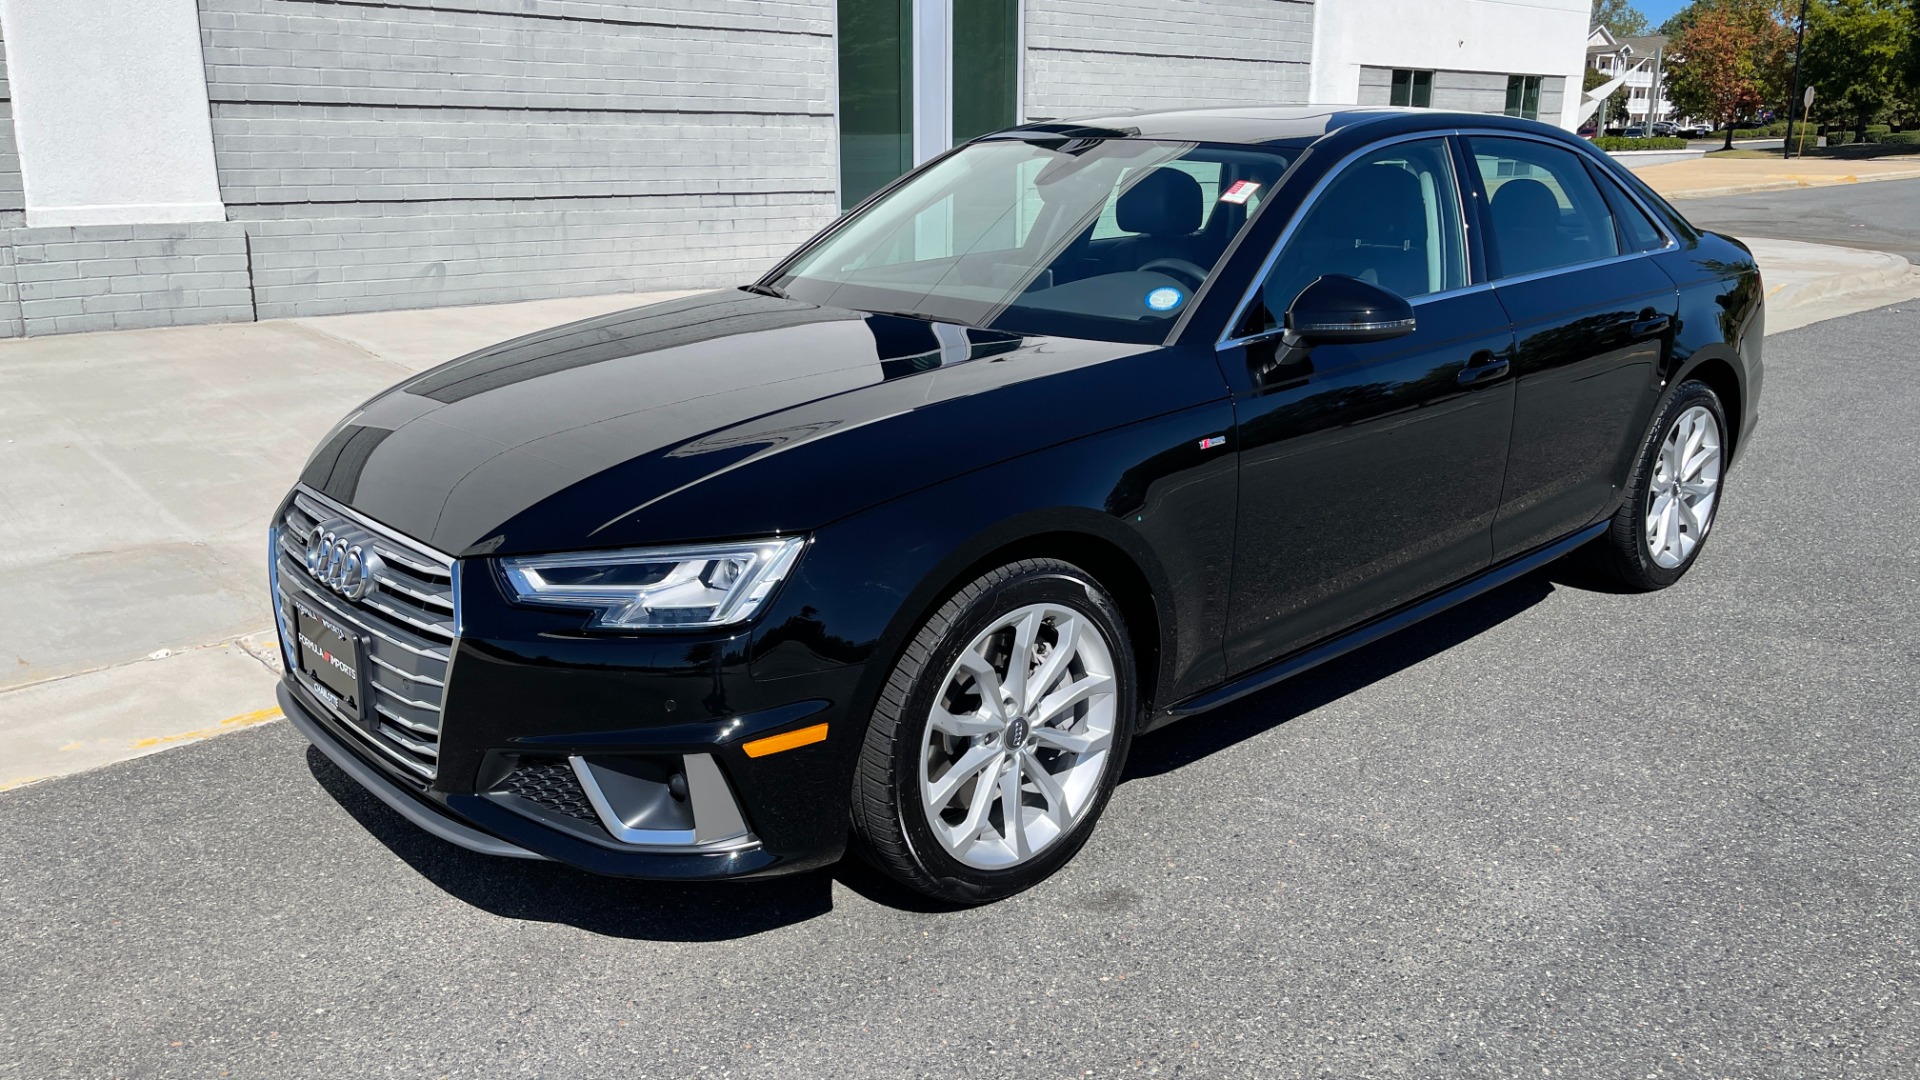 Used 2019 Audi A4 PREMIUM PLUS / COLD WEATHER / AUDI BEAM RINGS / LEATHER / QUATTRO AWD for sale $29,995 at Formula Imports in Charlotte NC 28227 5